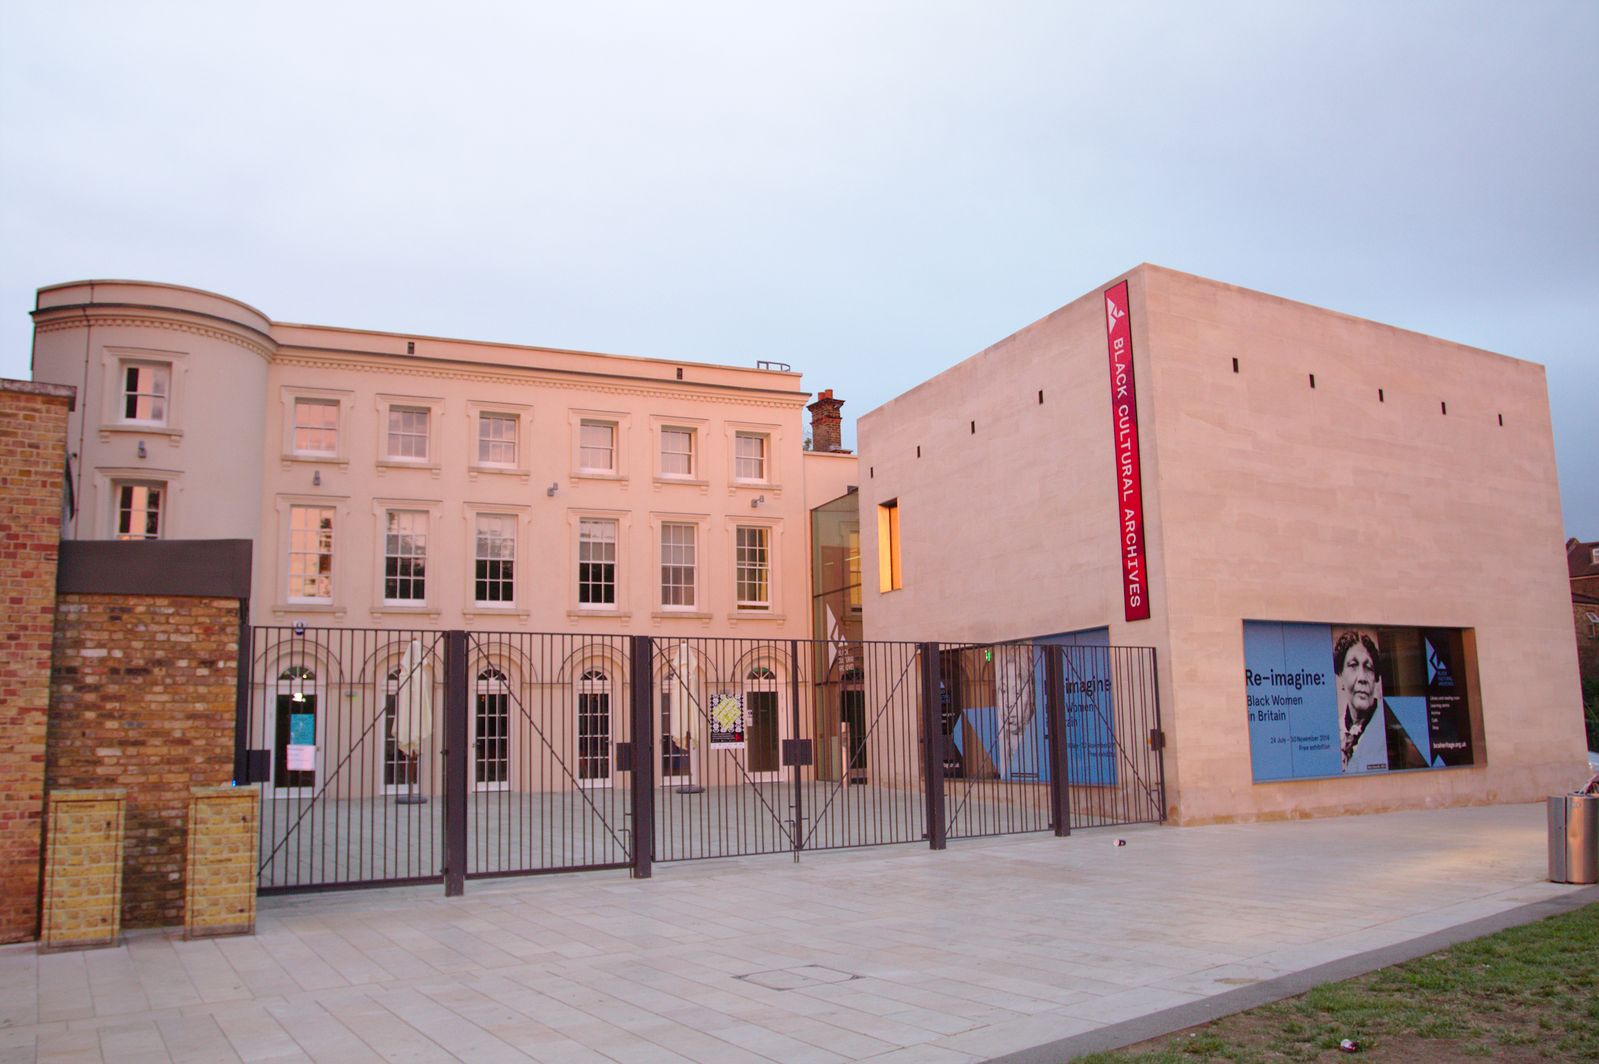 The headquarters of the Black Cultural Archives in the UK (Mark Longair/creative commons)